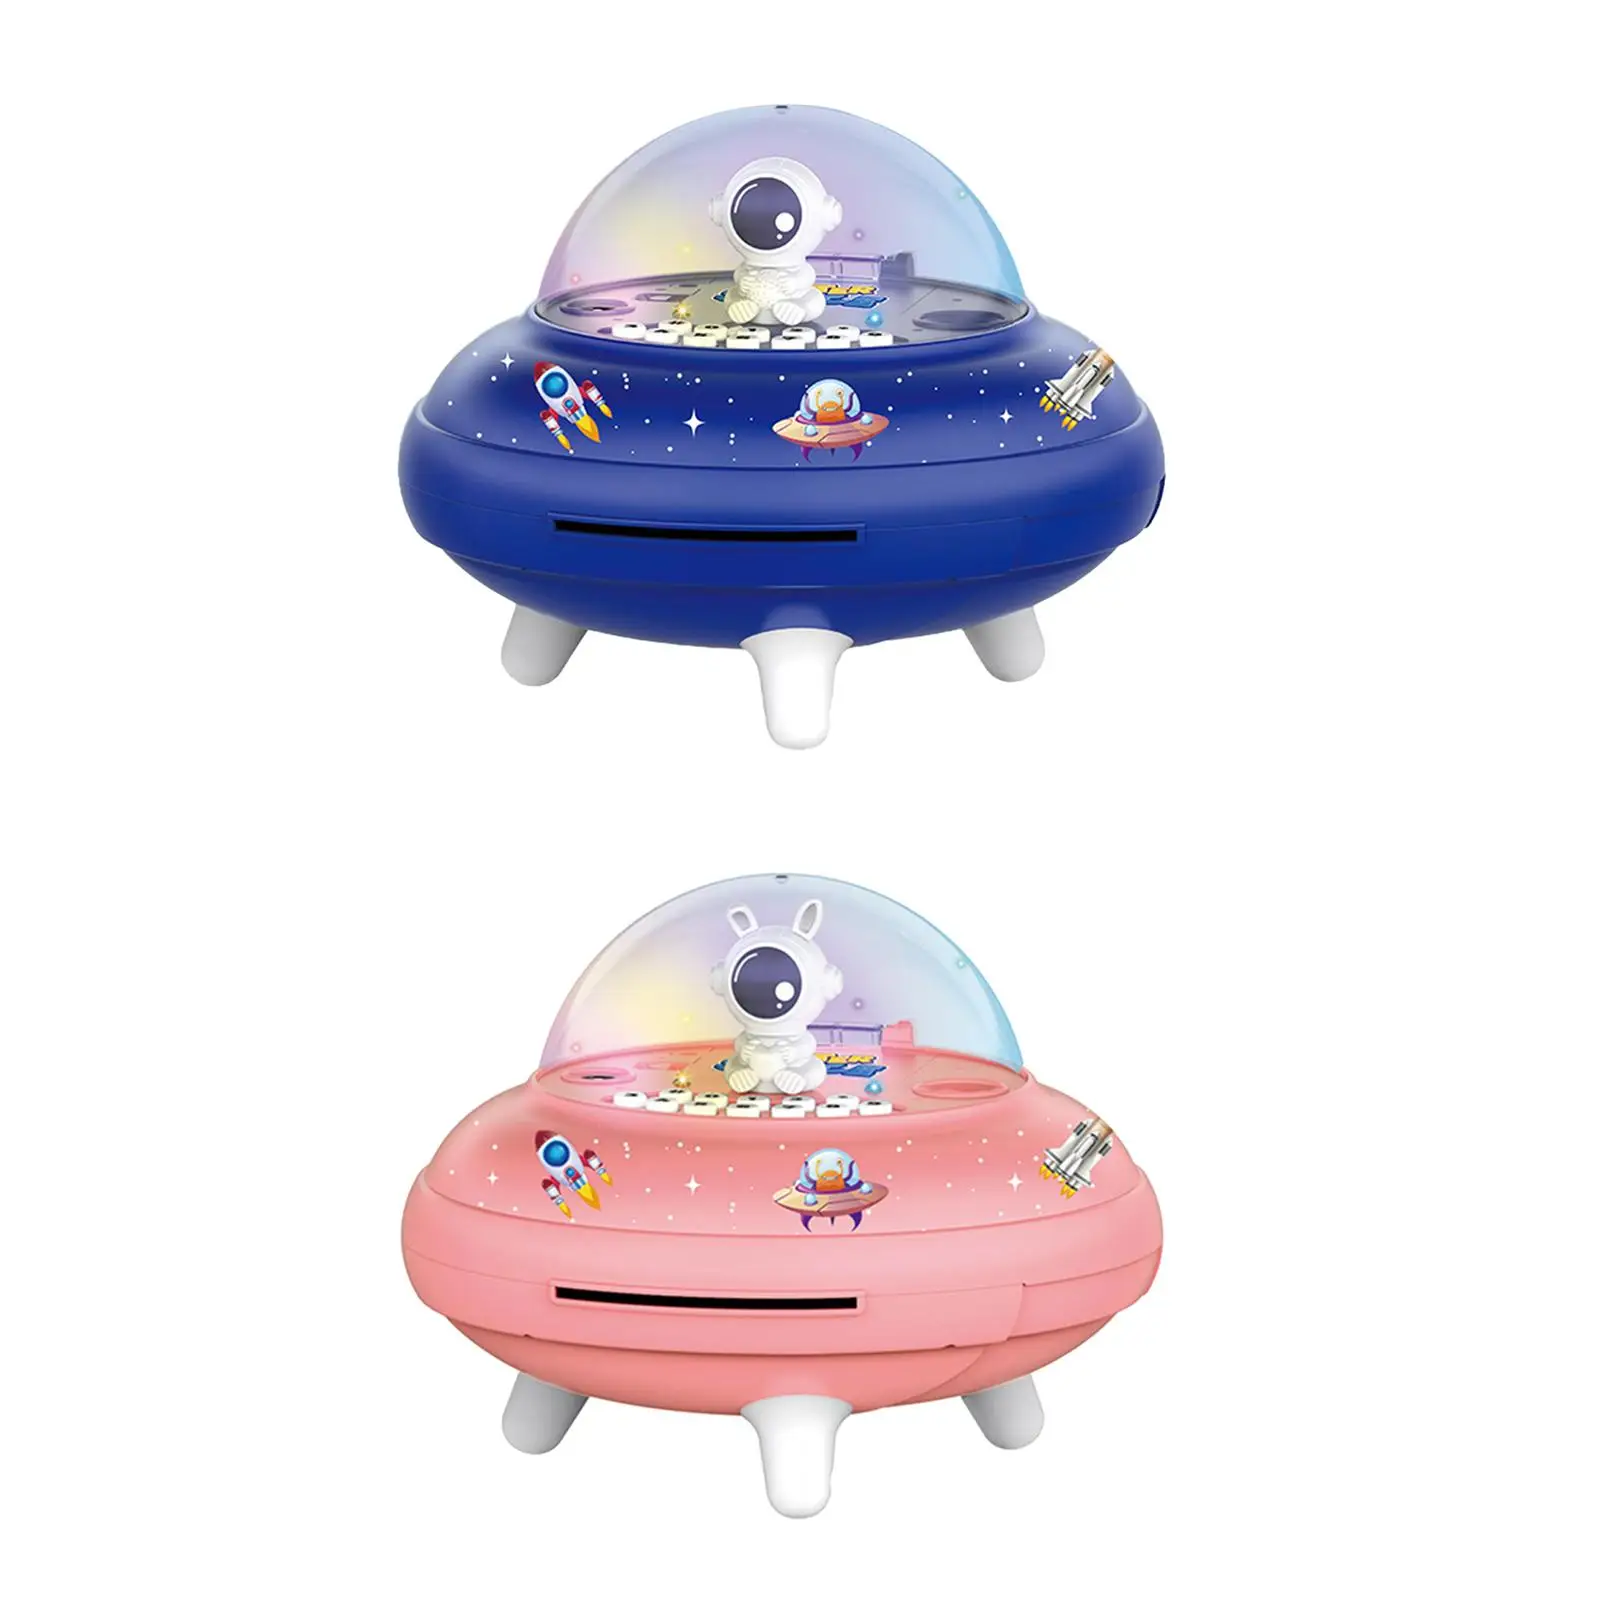 Space Ship Piggy Banks Toys Kids Room Decor with Password Protection Gifts Piggy Banks Kids Toys for Boys Girls Age 5-15